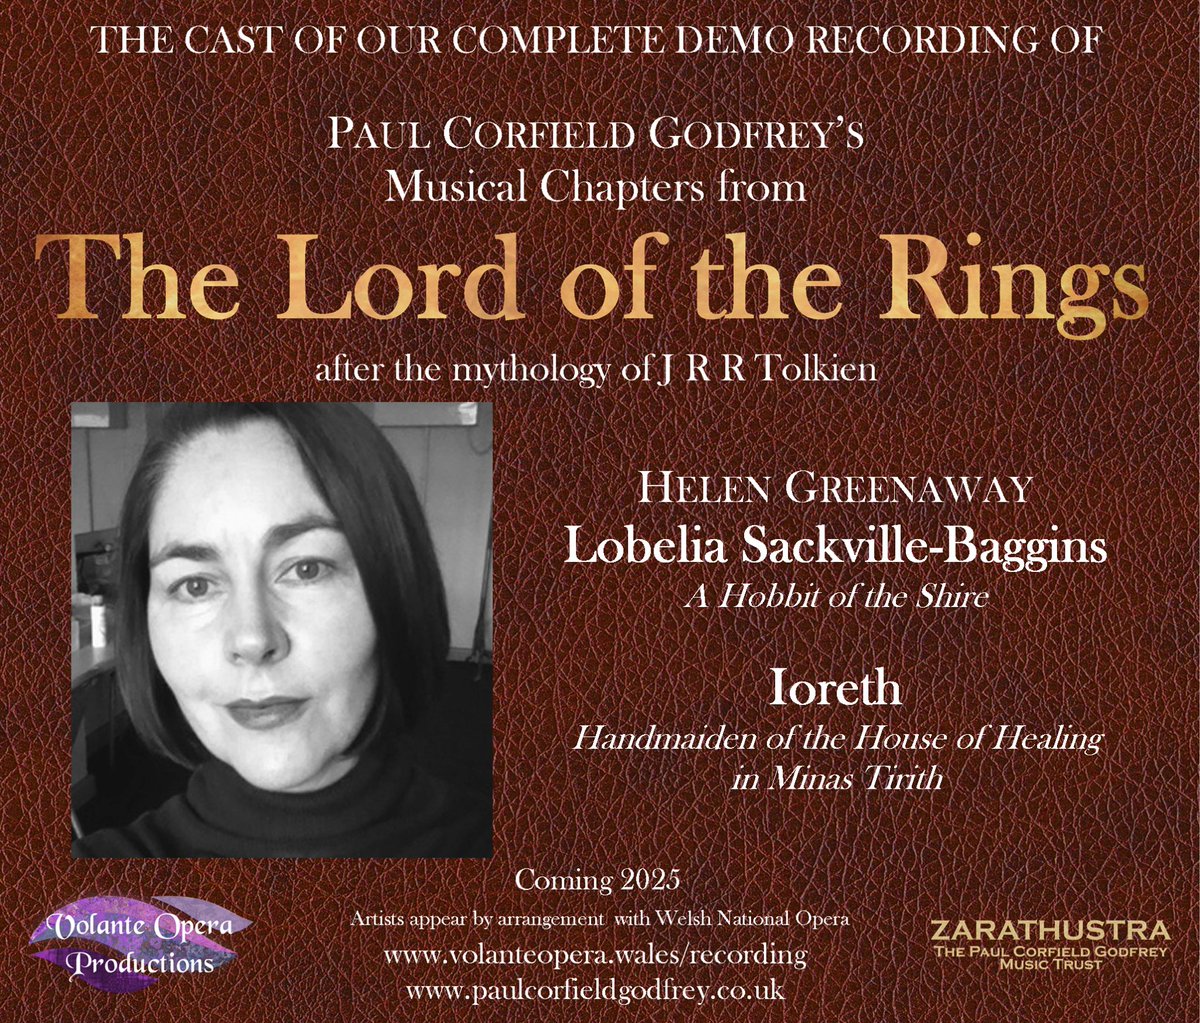 @GreenawayHelen will be performing the roles of Lobelia and Ioreth on our Complete Demo Recording of @TheCorfield Musical Chapters from #TheLordoftheRings #Tolkien
volanteopera.wales
 #opera #lordoftherings #middleearth #operasinger #ioreth #hobbit #gondor #housesofhealing